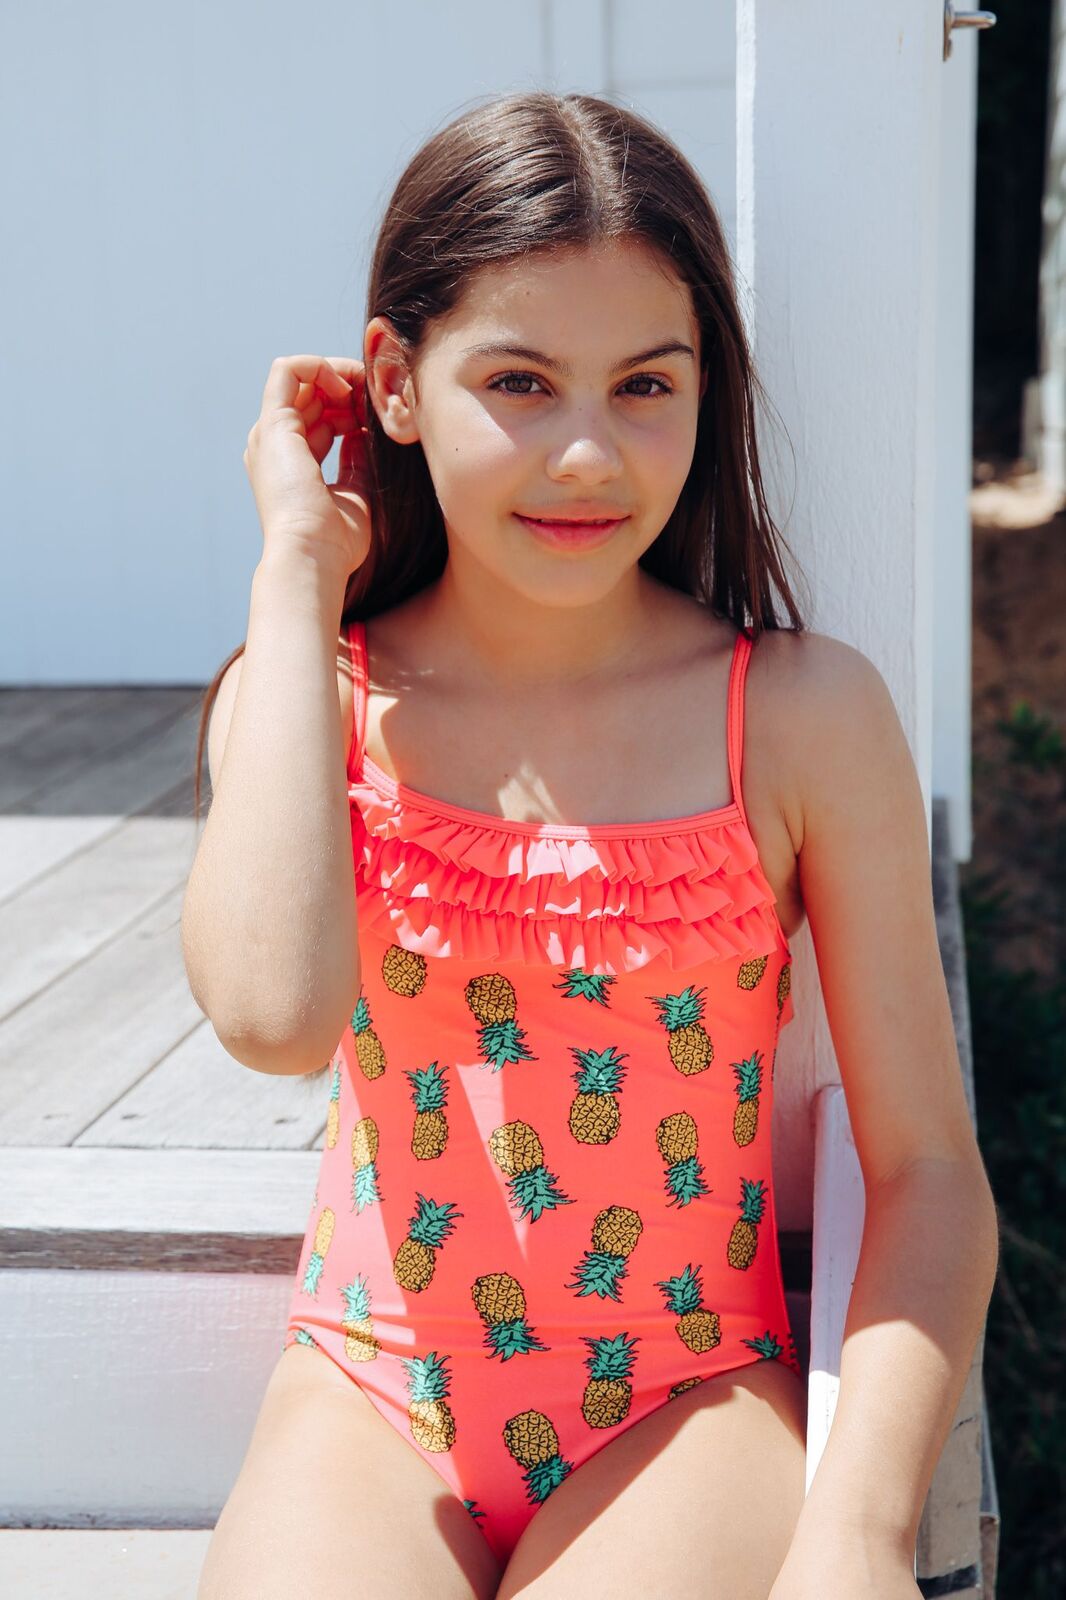 Girls Size 4 7 Bathers Swimsuit Coral Pineapple Print Ebay